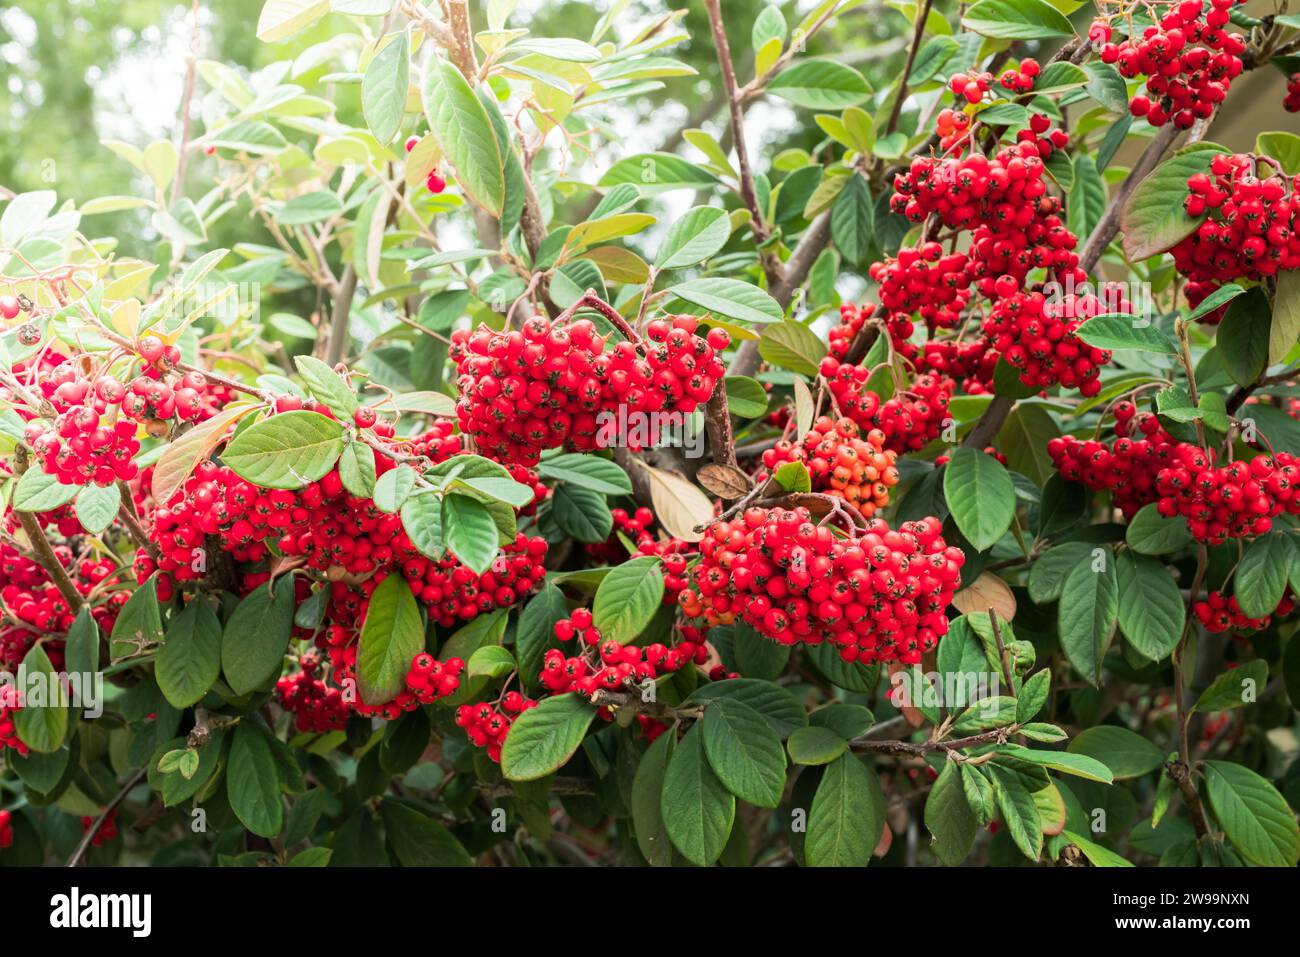 Cotoneaster berries close-up. Cotoneaster coriaceus ornamental plant with vibrant red berries and dark green foliage Stock Photo